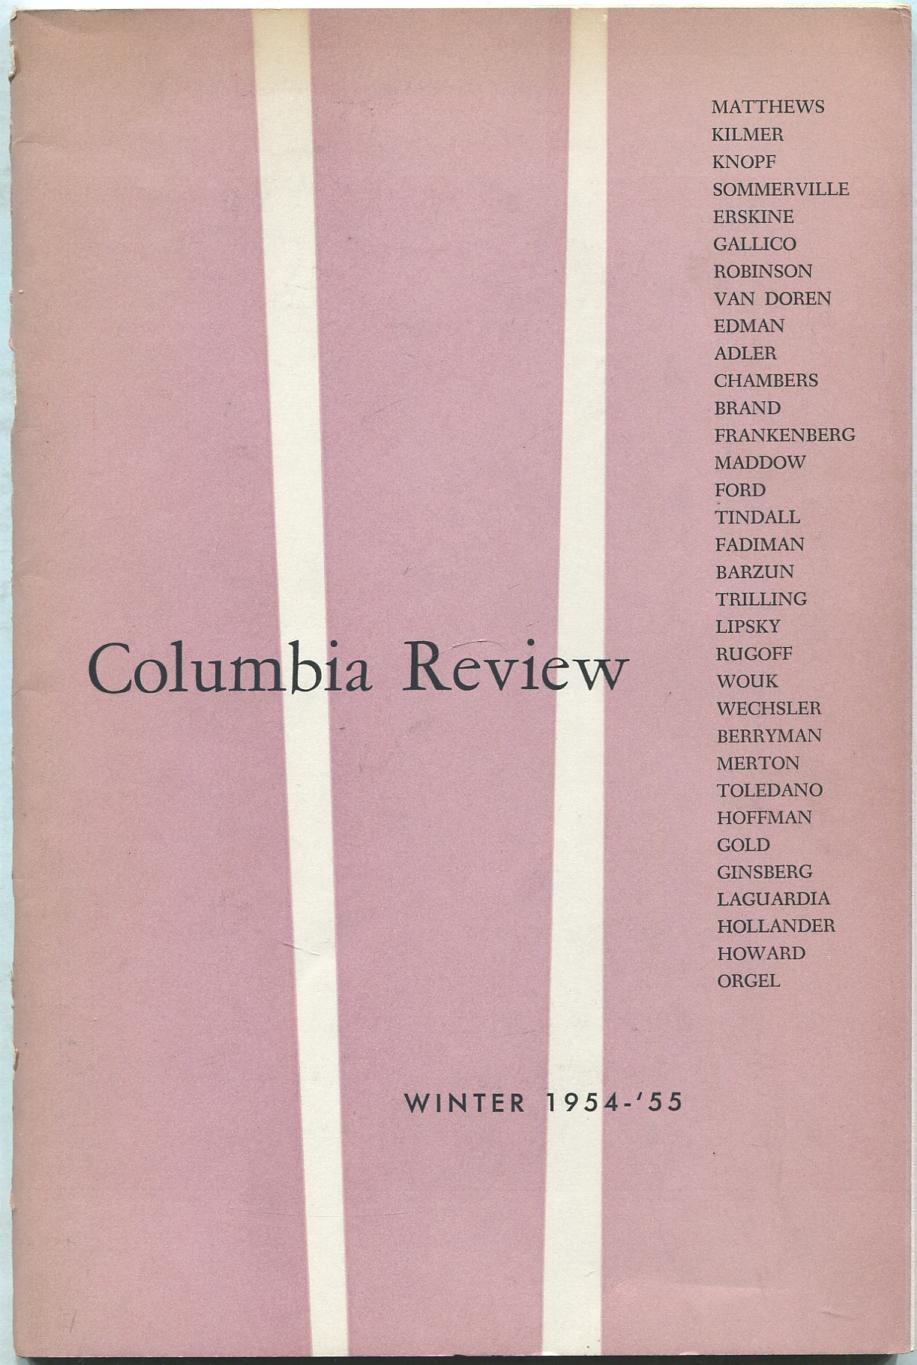 Columbia Review: February, 1955, Volume 35, No. 2